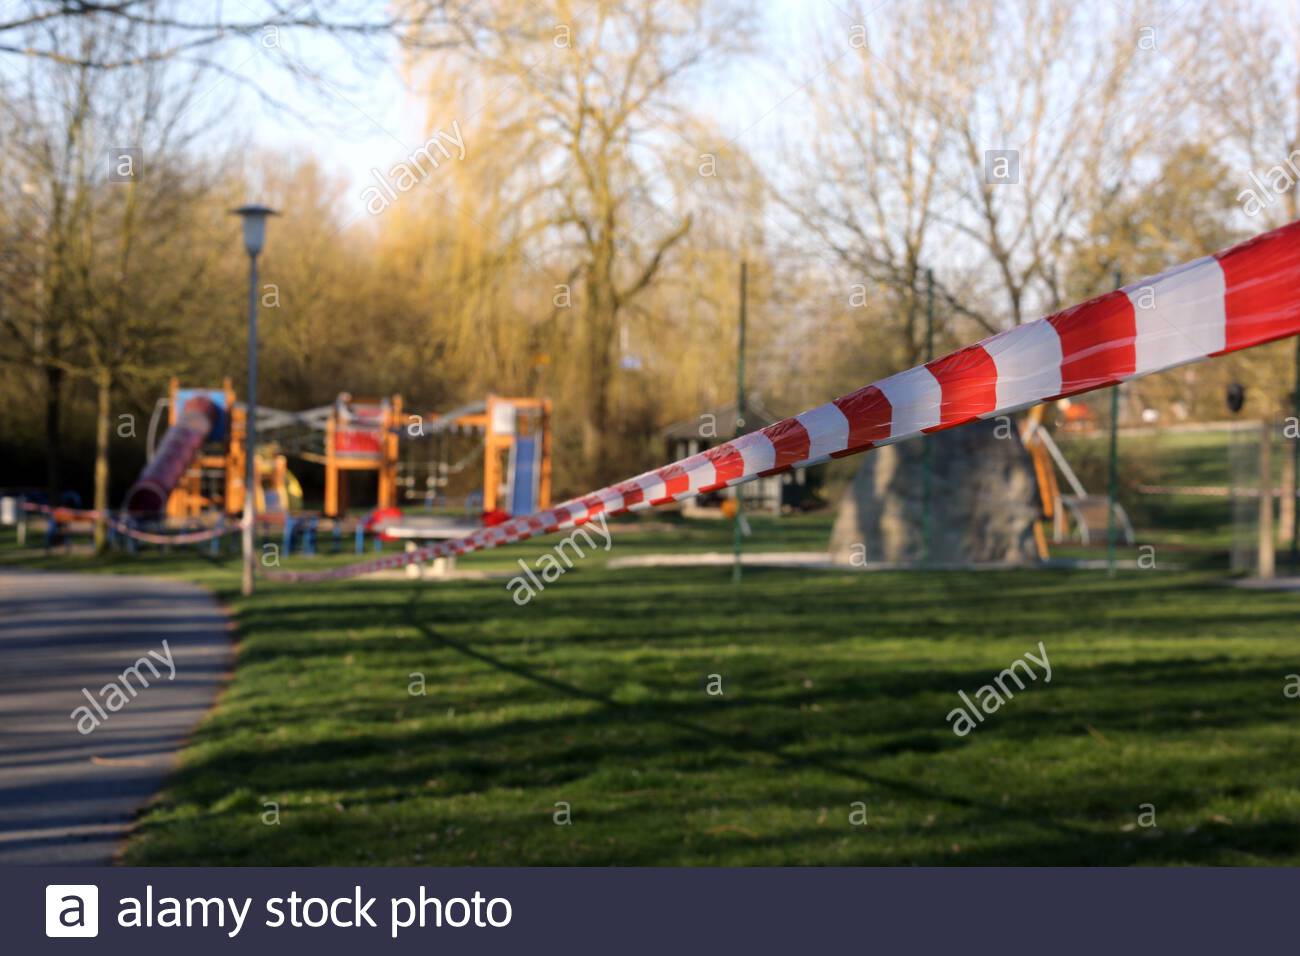 A closed-off, deserted playground in Coburg, Bavaria, this morning as strict rules concerning movement outside the home continue to be implemented. Pe Stock Photo